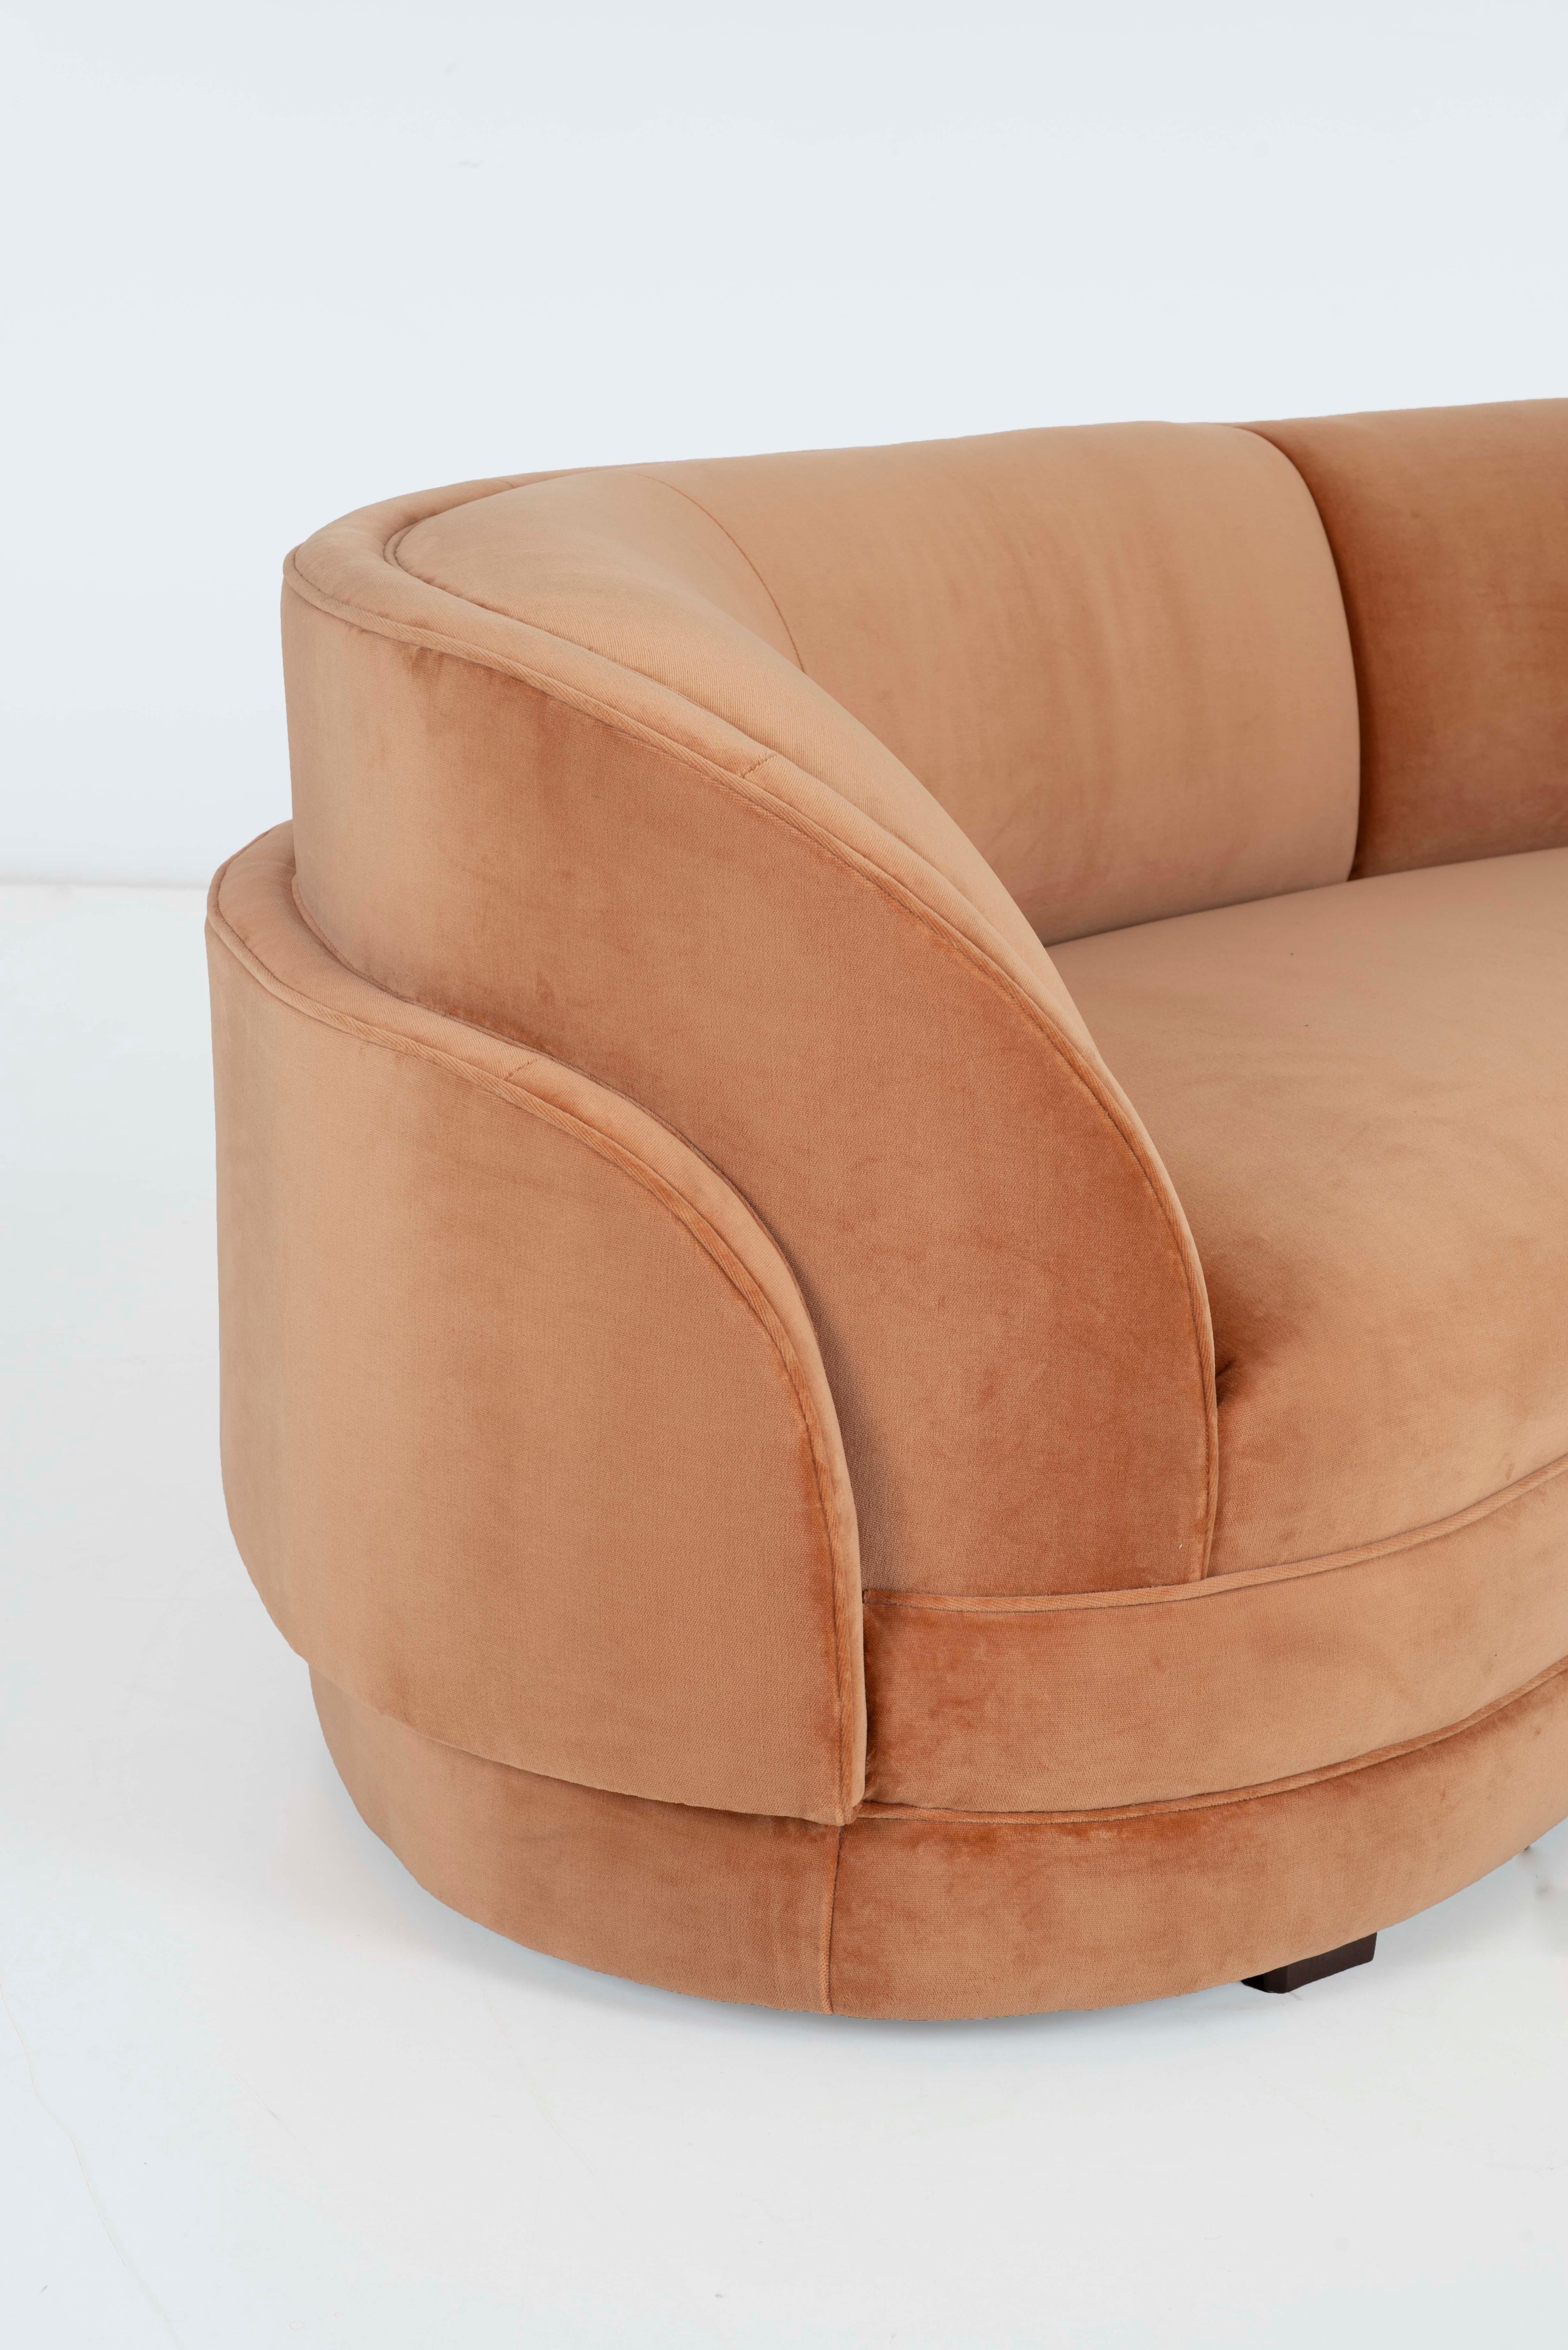 Pair of Mid-Century Style Curved Sofas 1